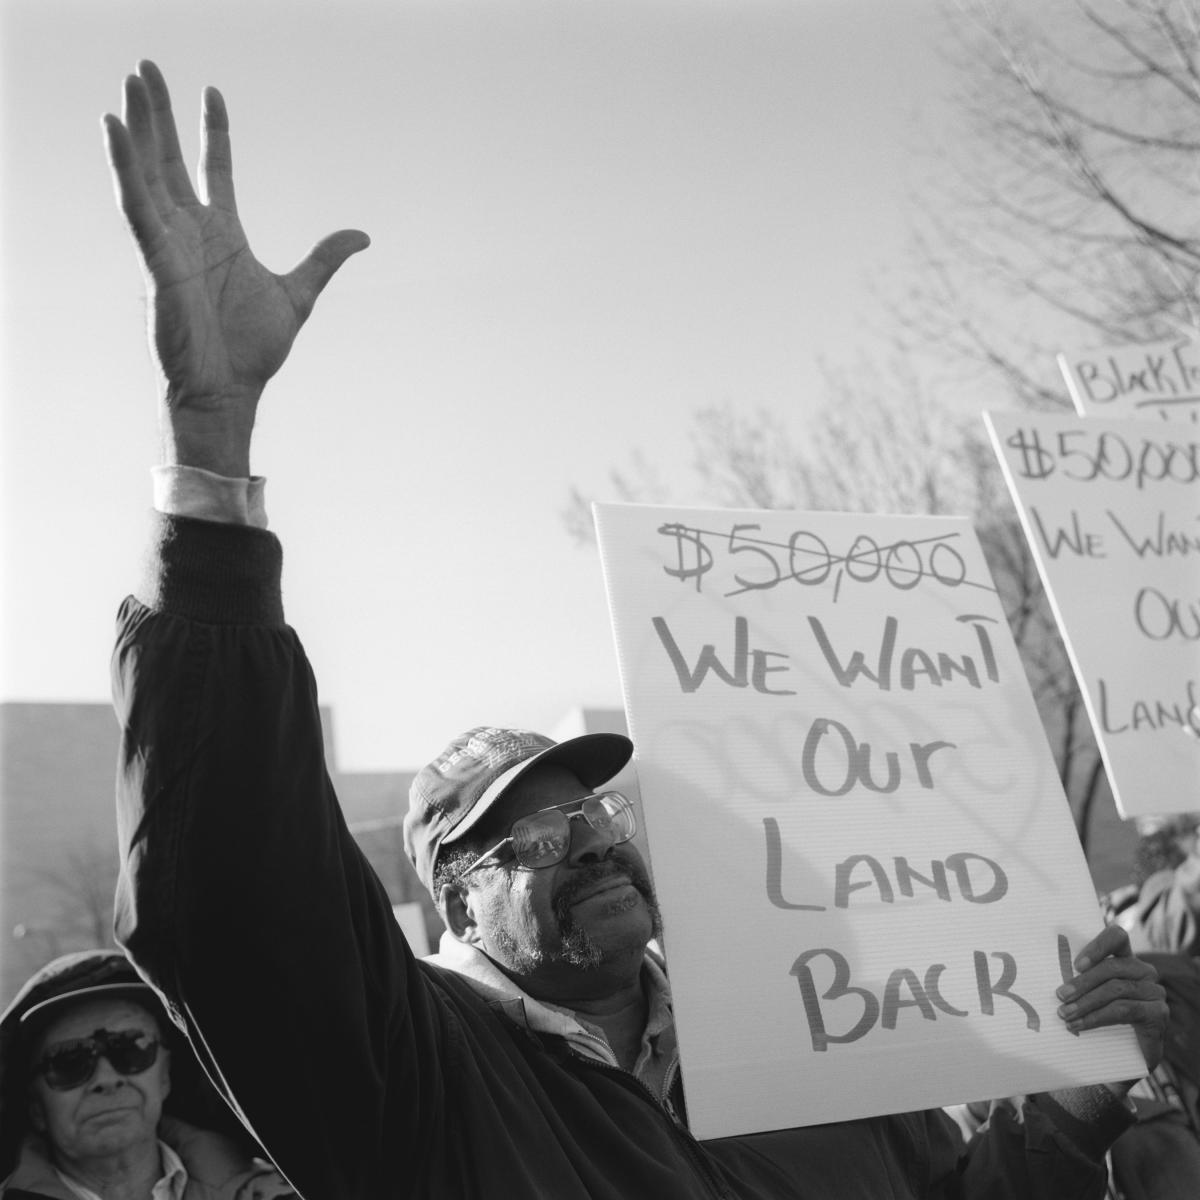 <p><center>Washington, D.C.:</center></p>
Black farmers protest outside the U.S. District Courthouse prior to their hearing on their class-action lawsuit against the USDA. : Images : AMERICAN BLACK FARMERS PROJECT - John Ficara